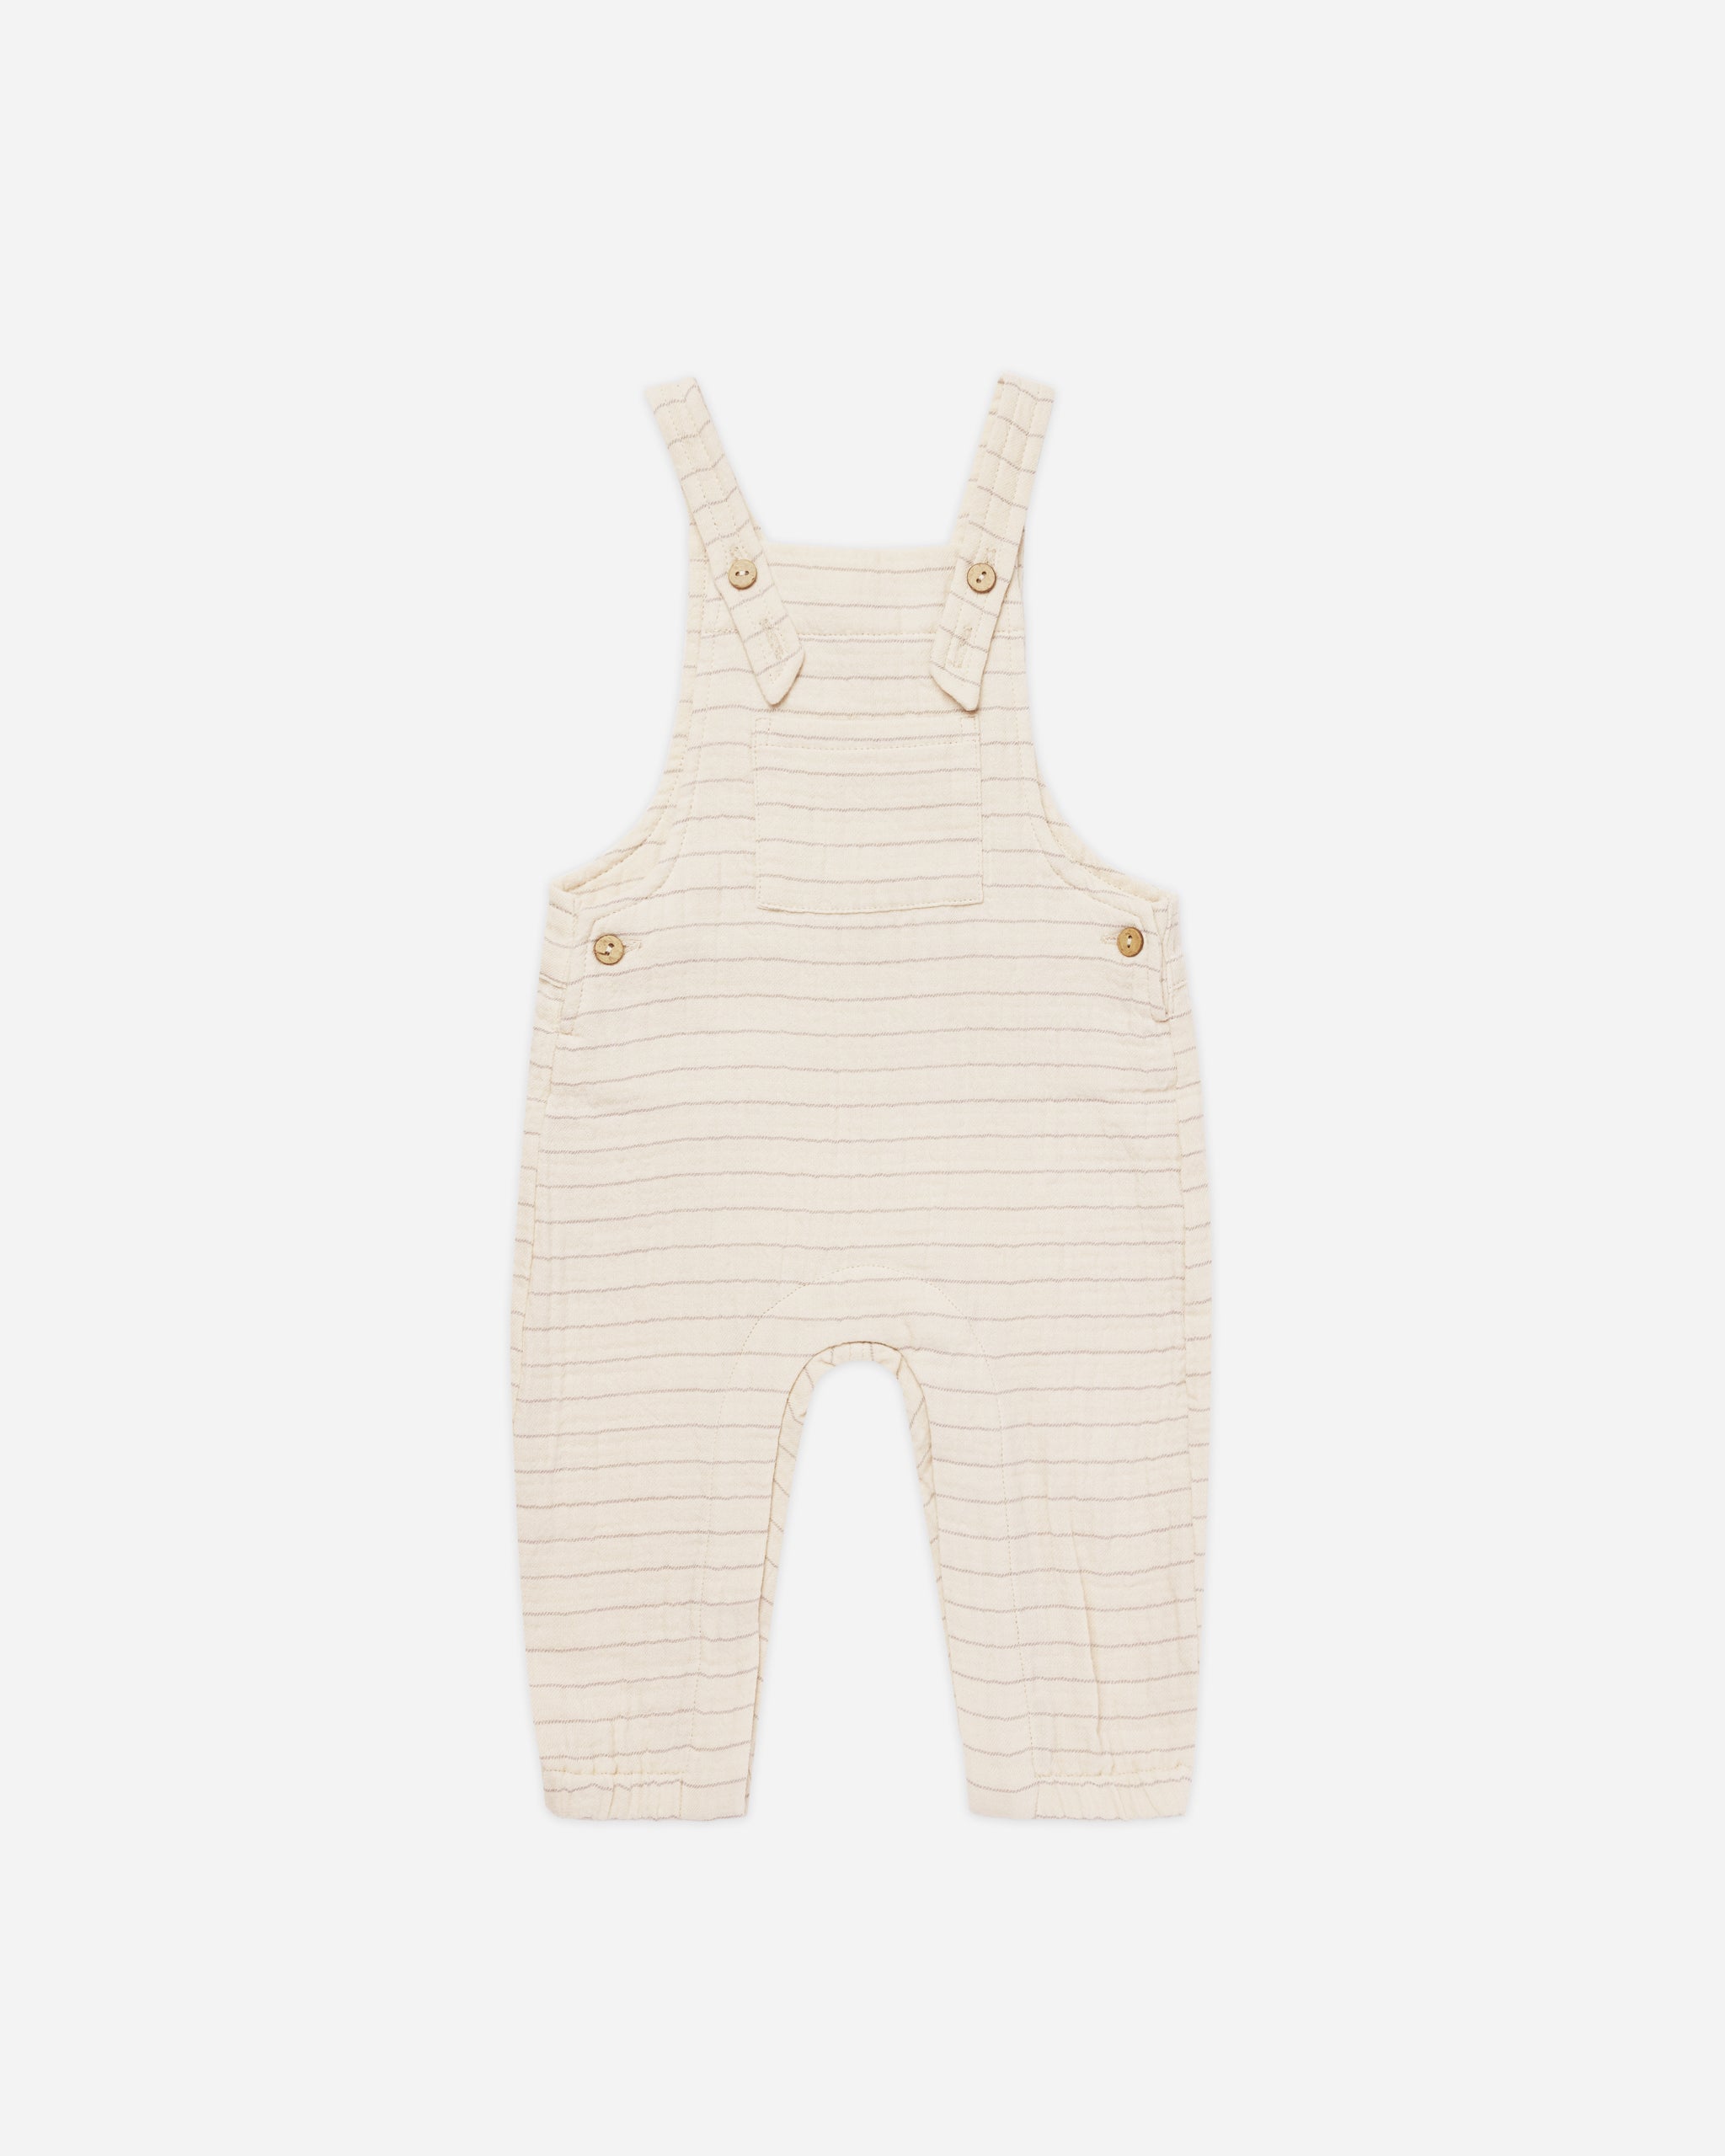 Baby Overall || Vintage Stripe - Rylee + Cru | Kids Clothes | Trendy Baby Clothes | Modern Infant Outfits |